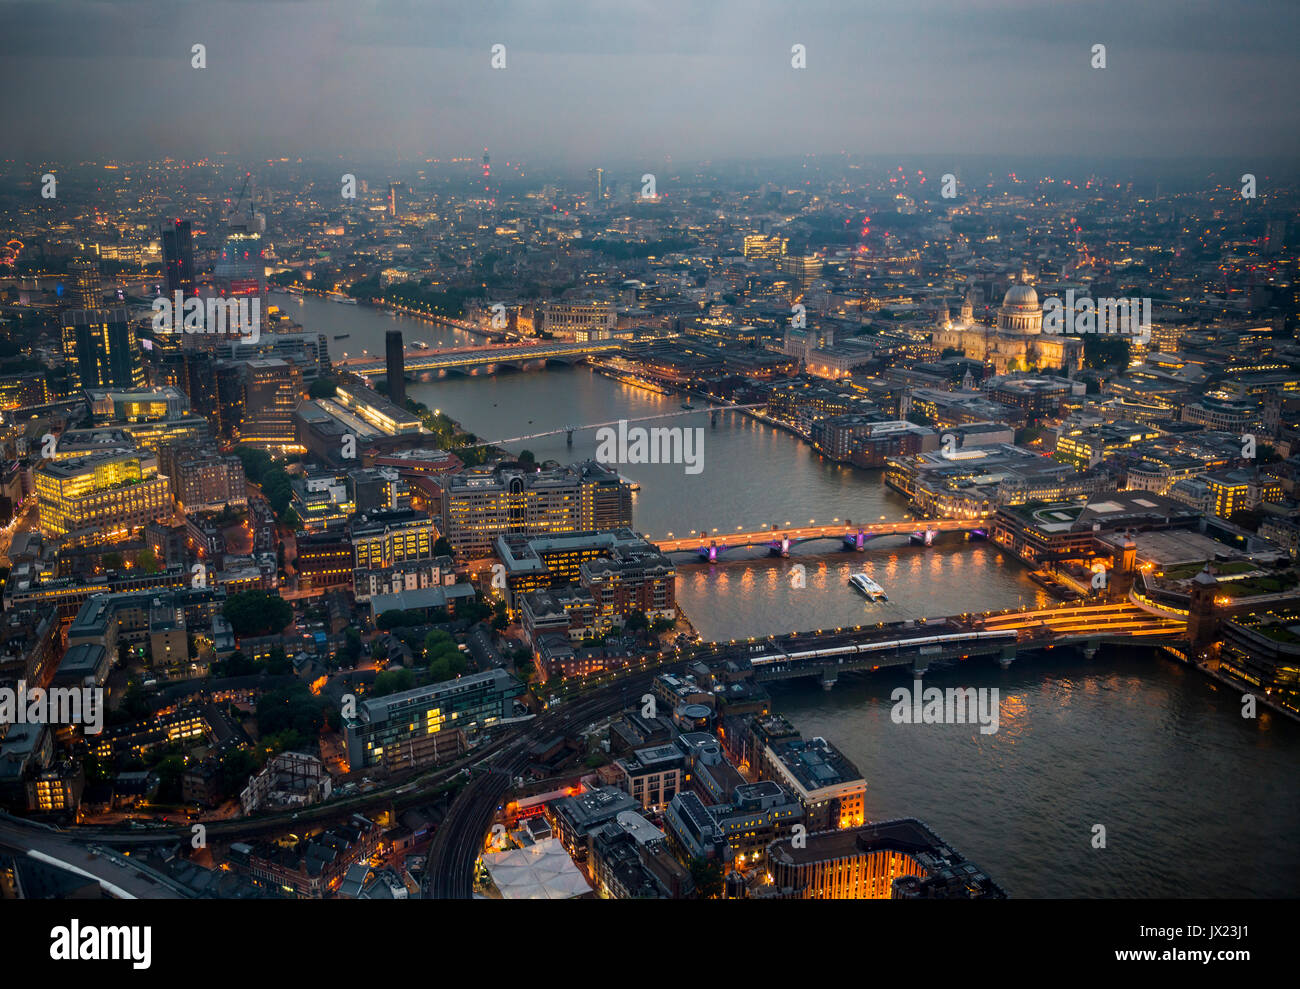 View of River Thames with London Bridge, Millenium Bridge and St. Paul's Cathedral, dusk, aerial view, London, England Stock Photo